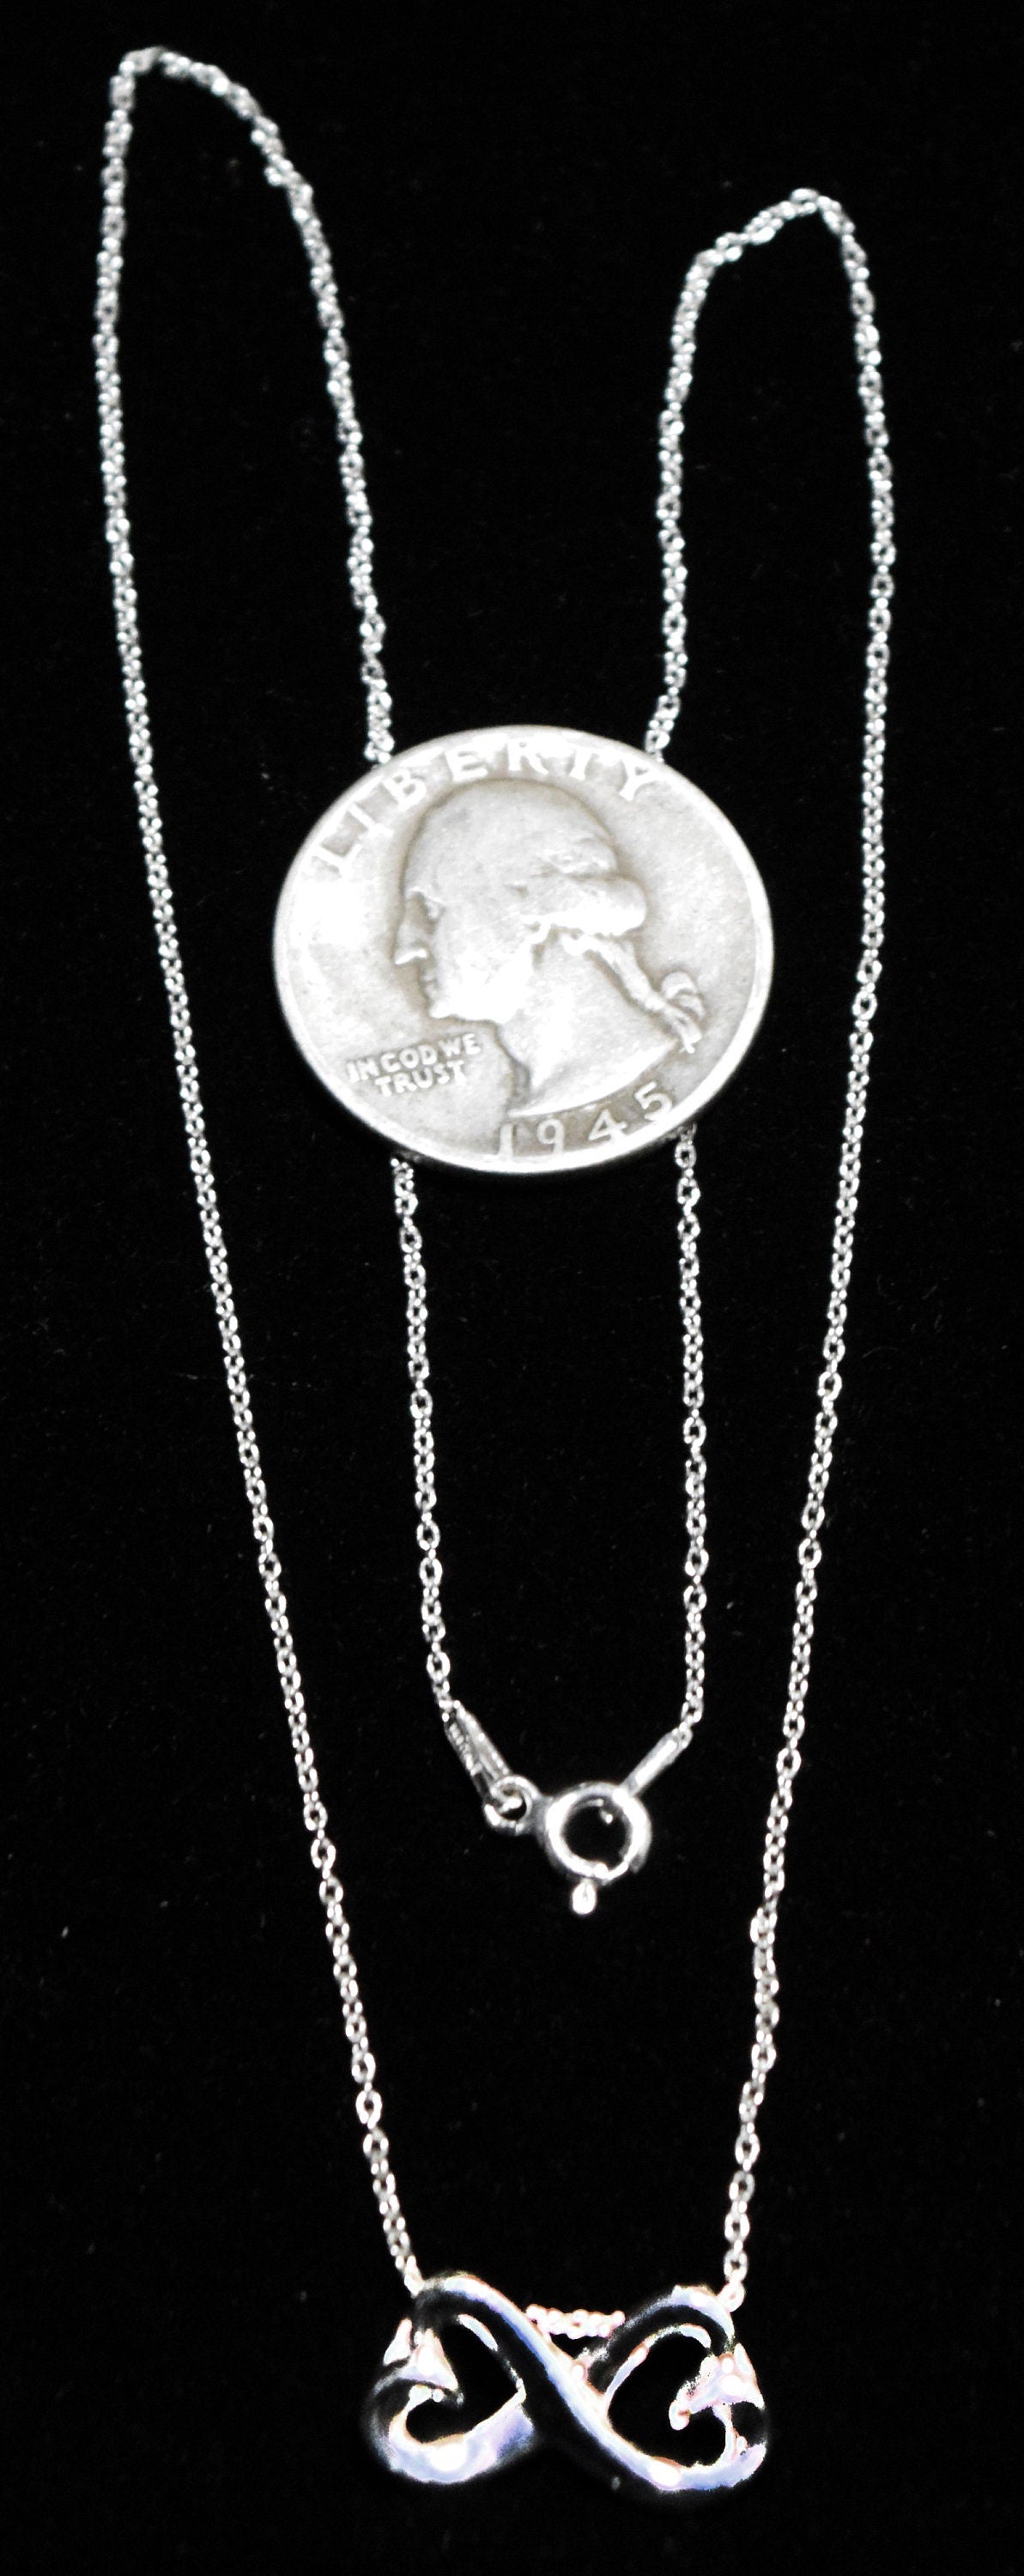 Charming sterling silver eternity hearts necklace, 16 inch.